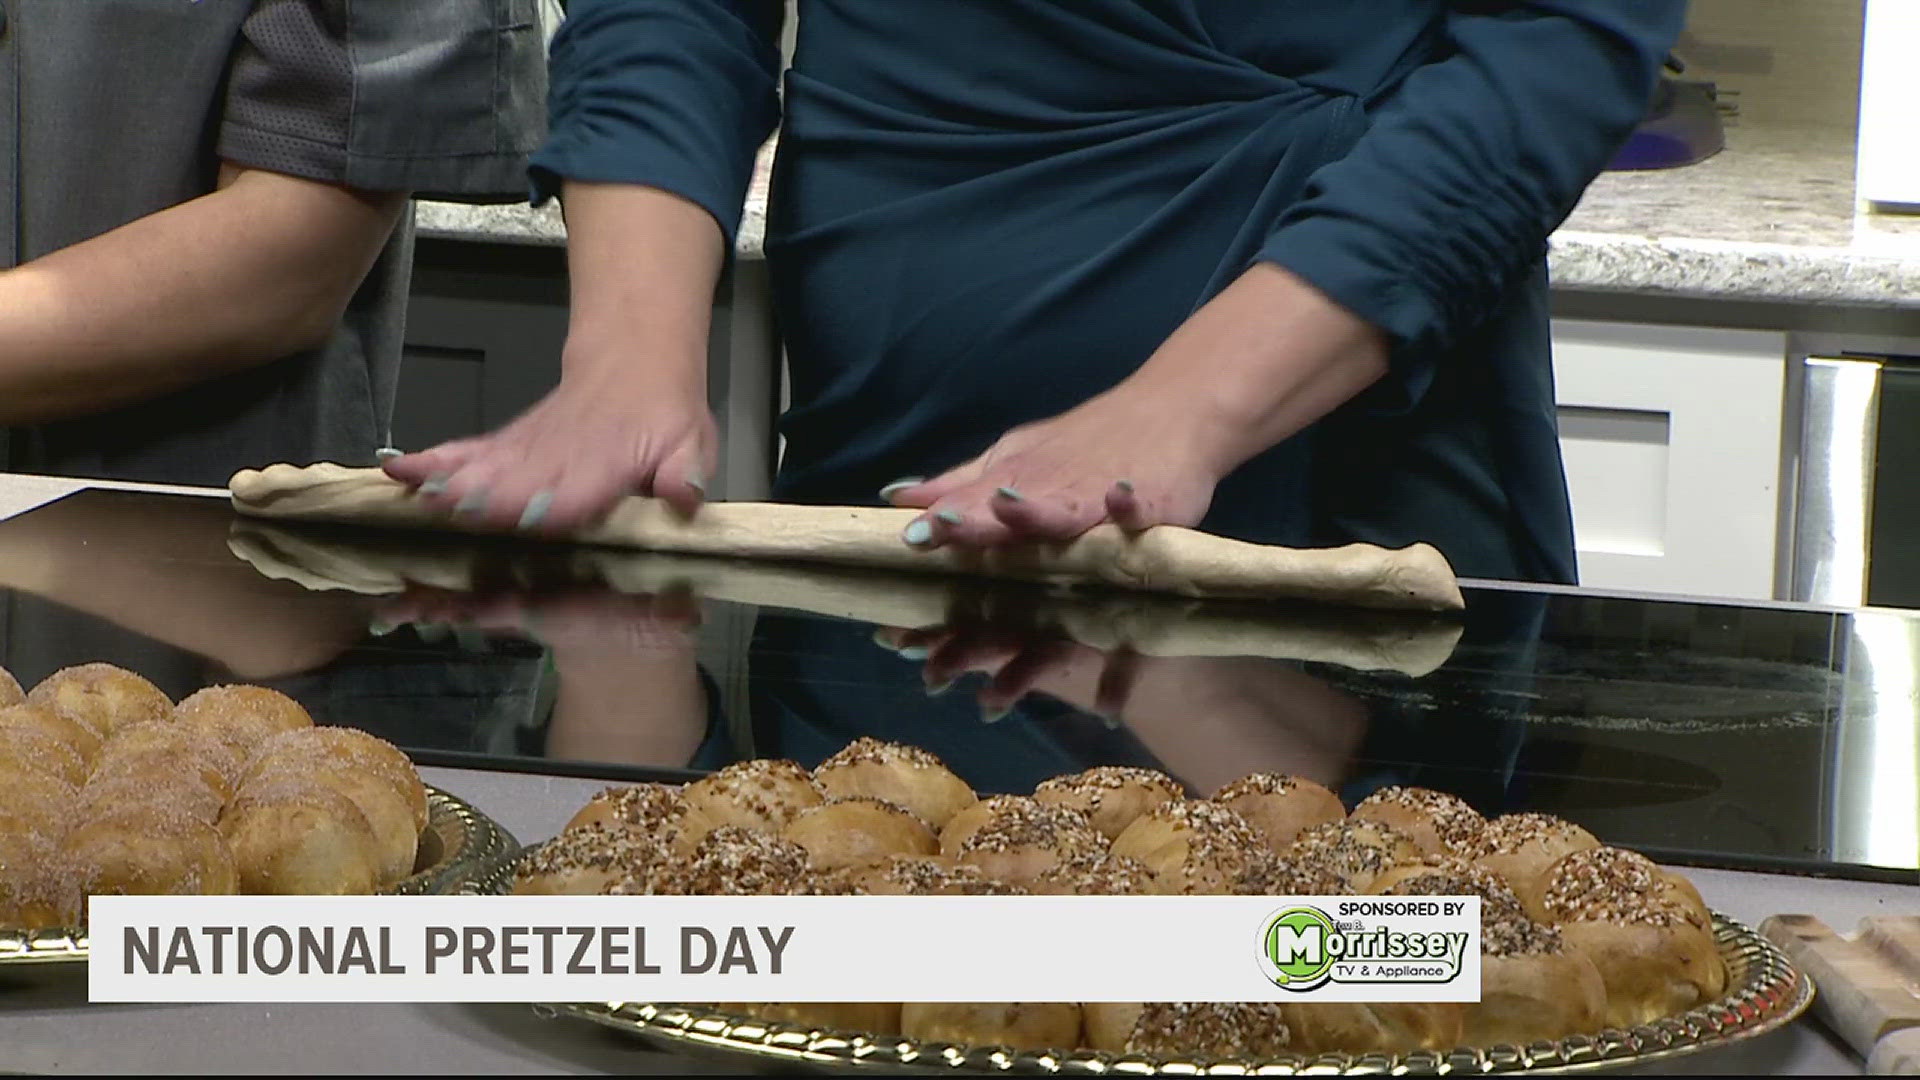 Maggie's Soft Pretzels recently opened in York and is celebrating National Pretzel Day with their Dutch-style pretzels.